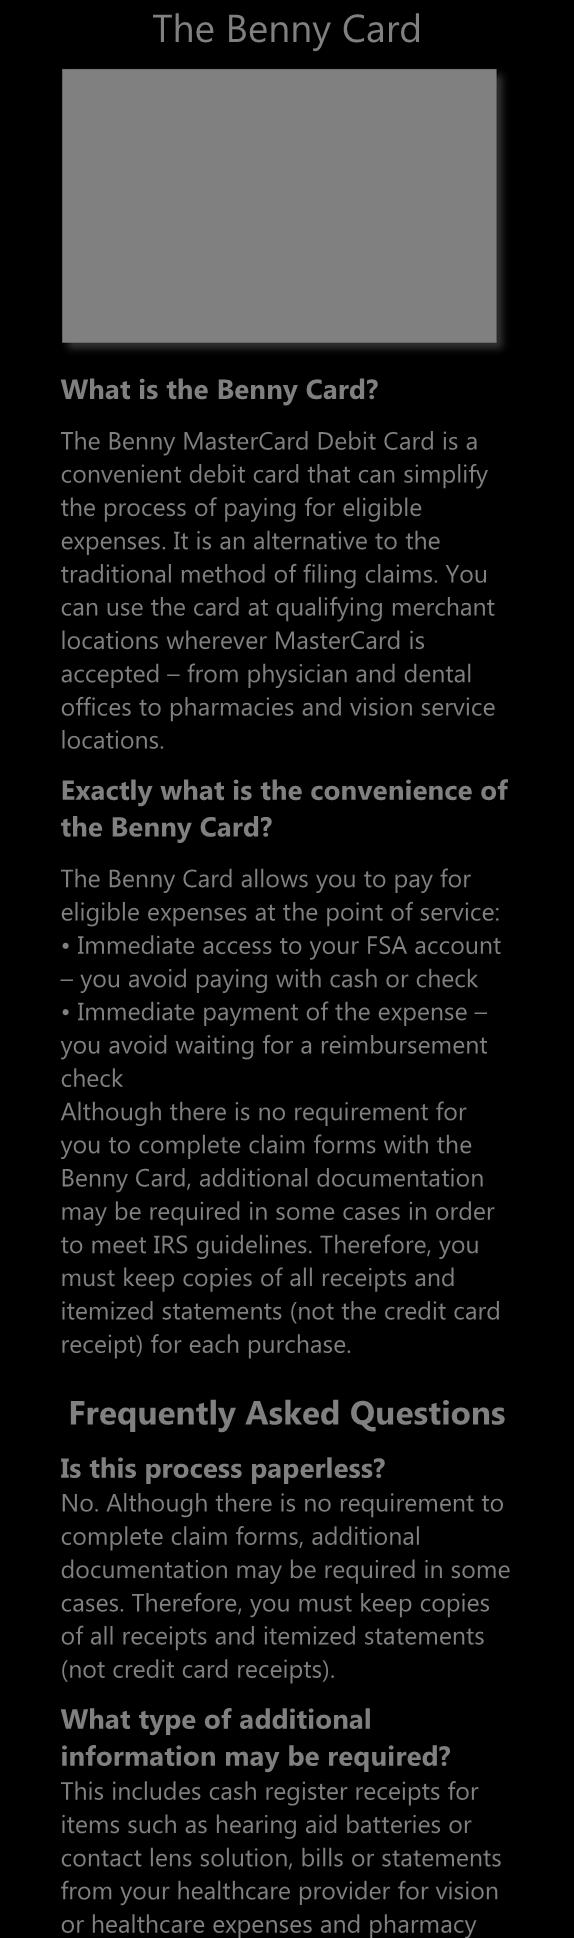 The Benny Card What is the Benny Card? The Benny MasterCard Debit Card is a convenient debit card that can simplify the process of paying for eligible expenses.